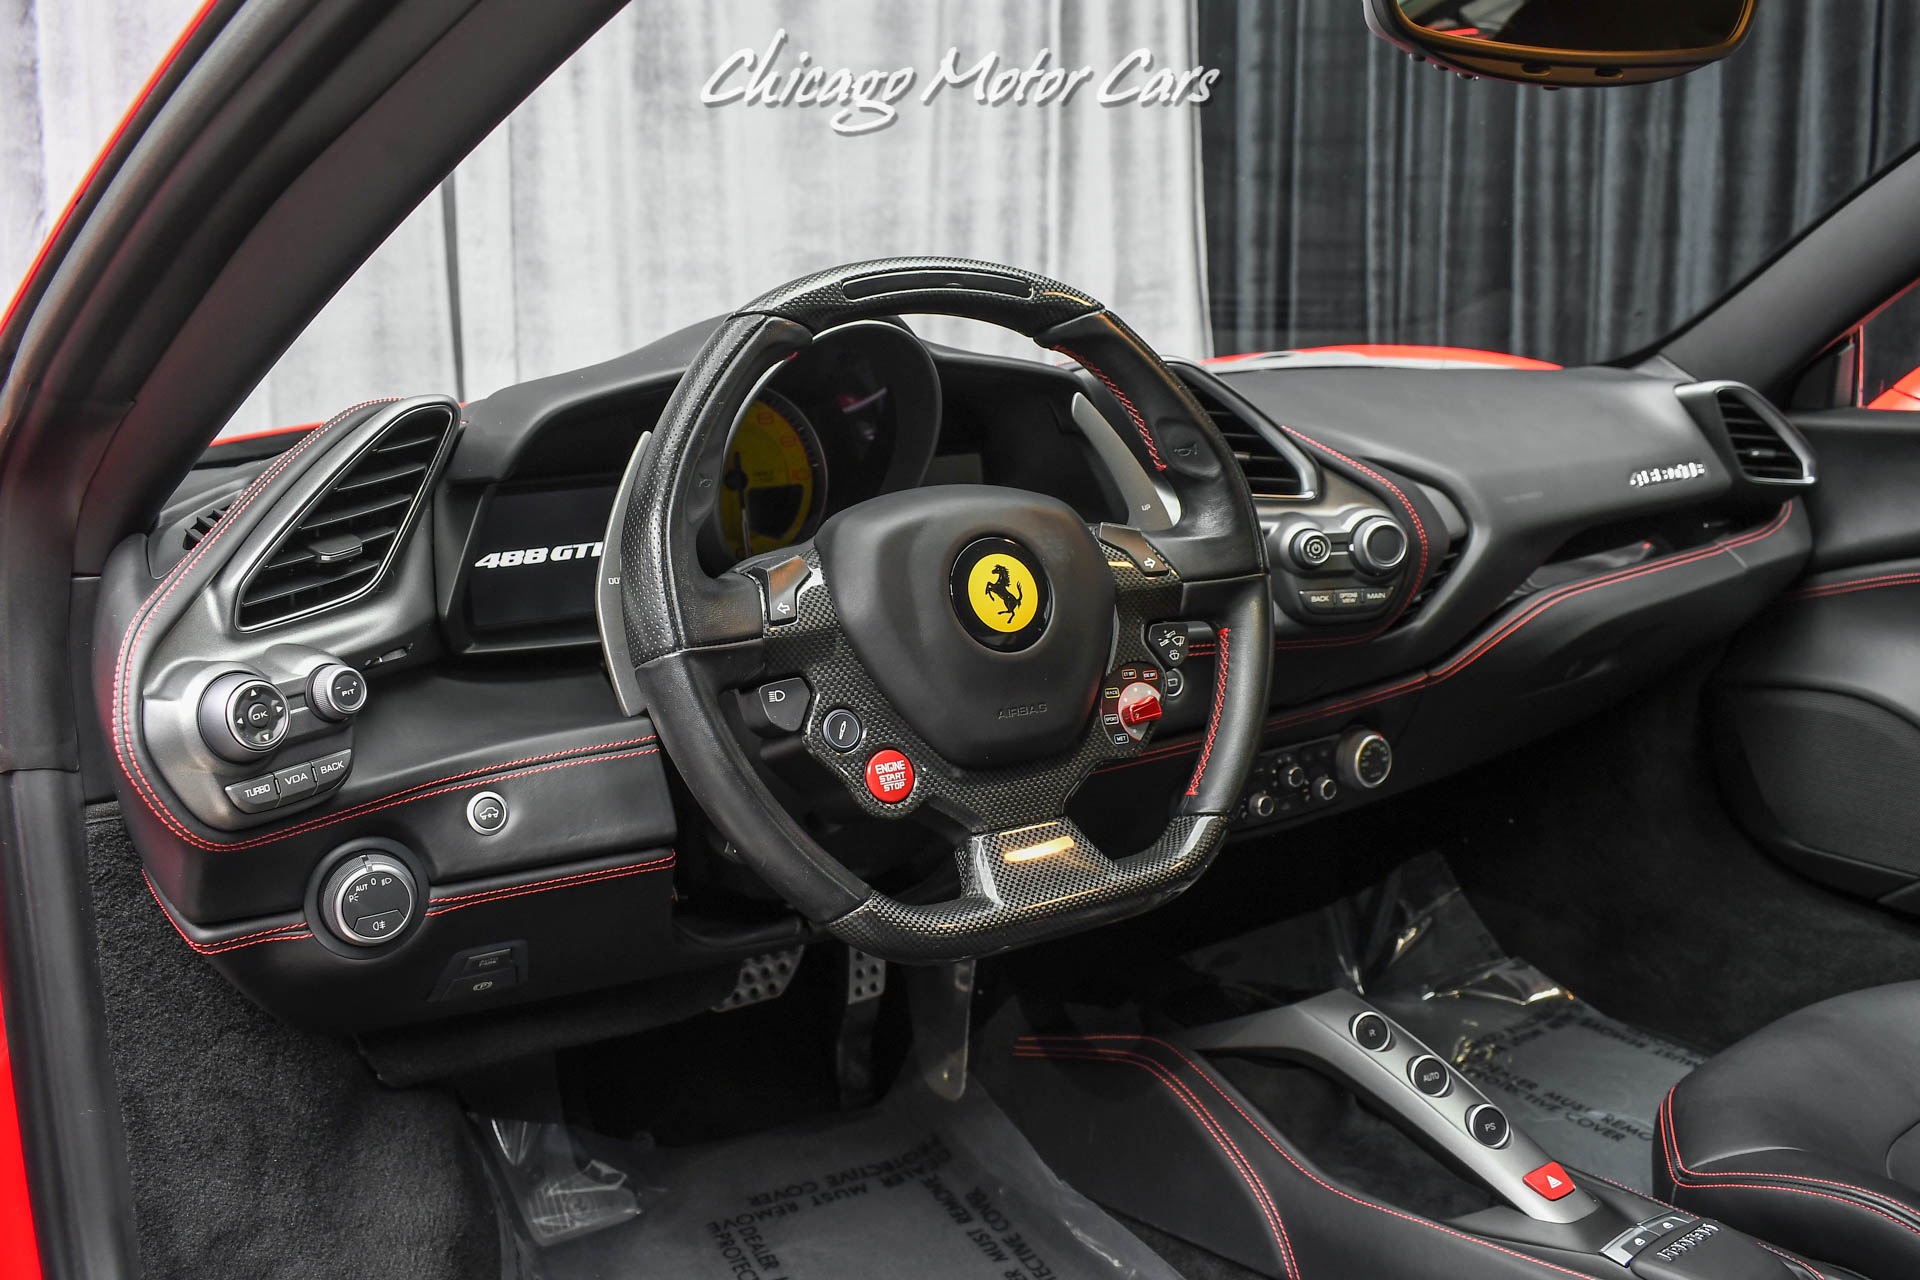 Used-2016-Ferrari-488-GTB-Coupe-6800-Miles-Over-50k-in-Upgrades-Front-Lift-Carbon-Fiber